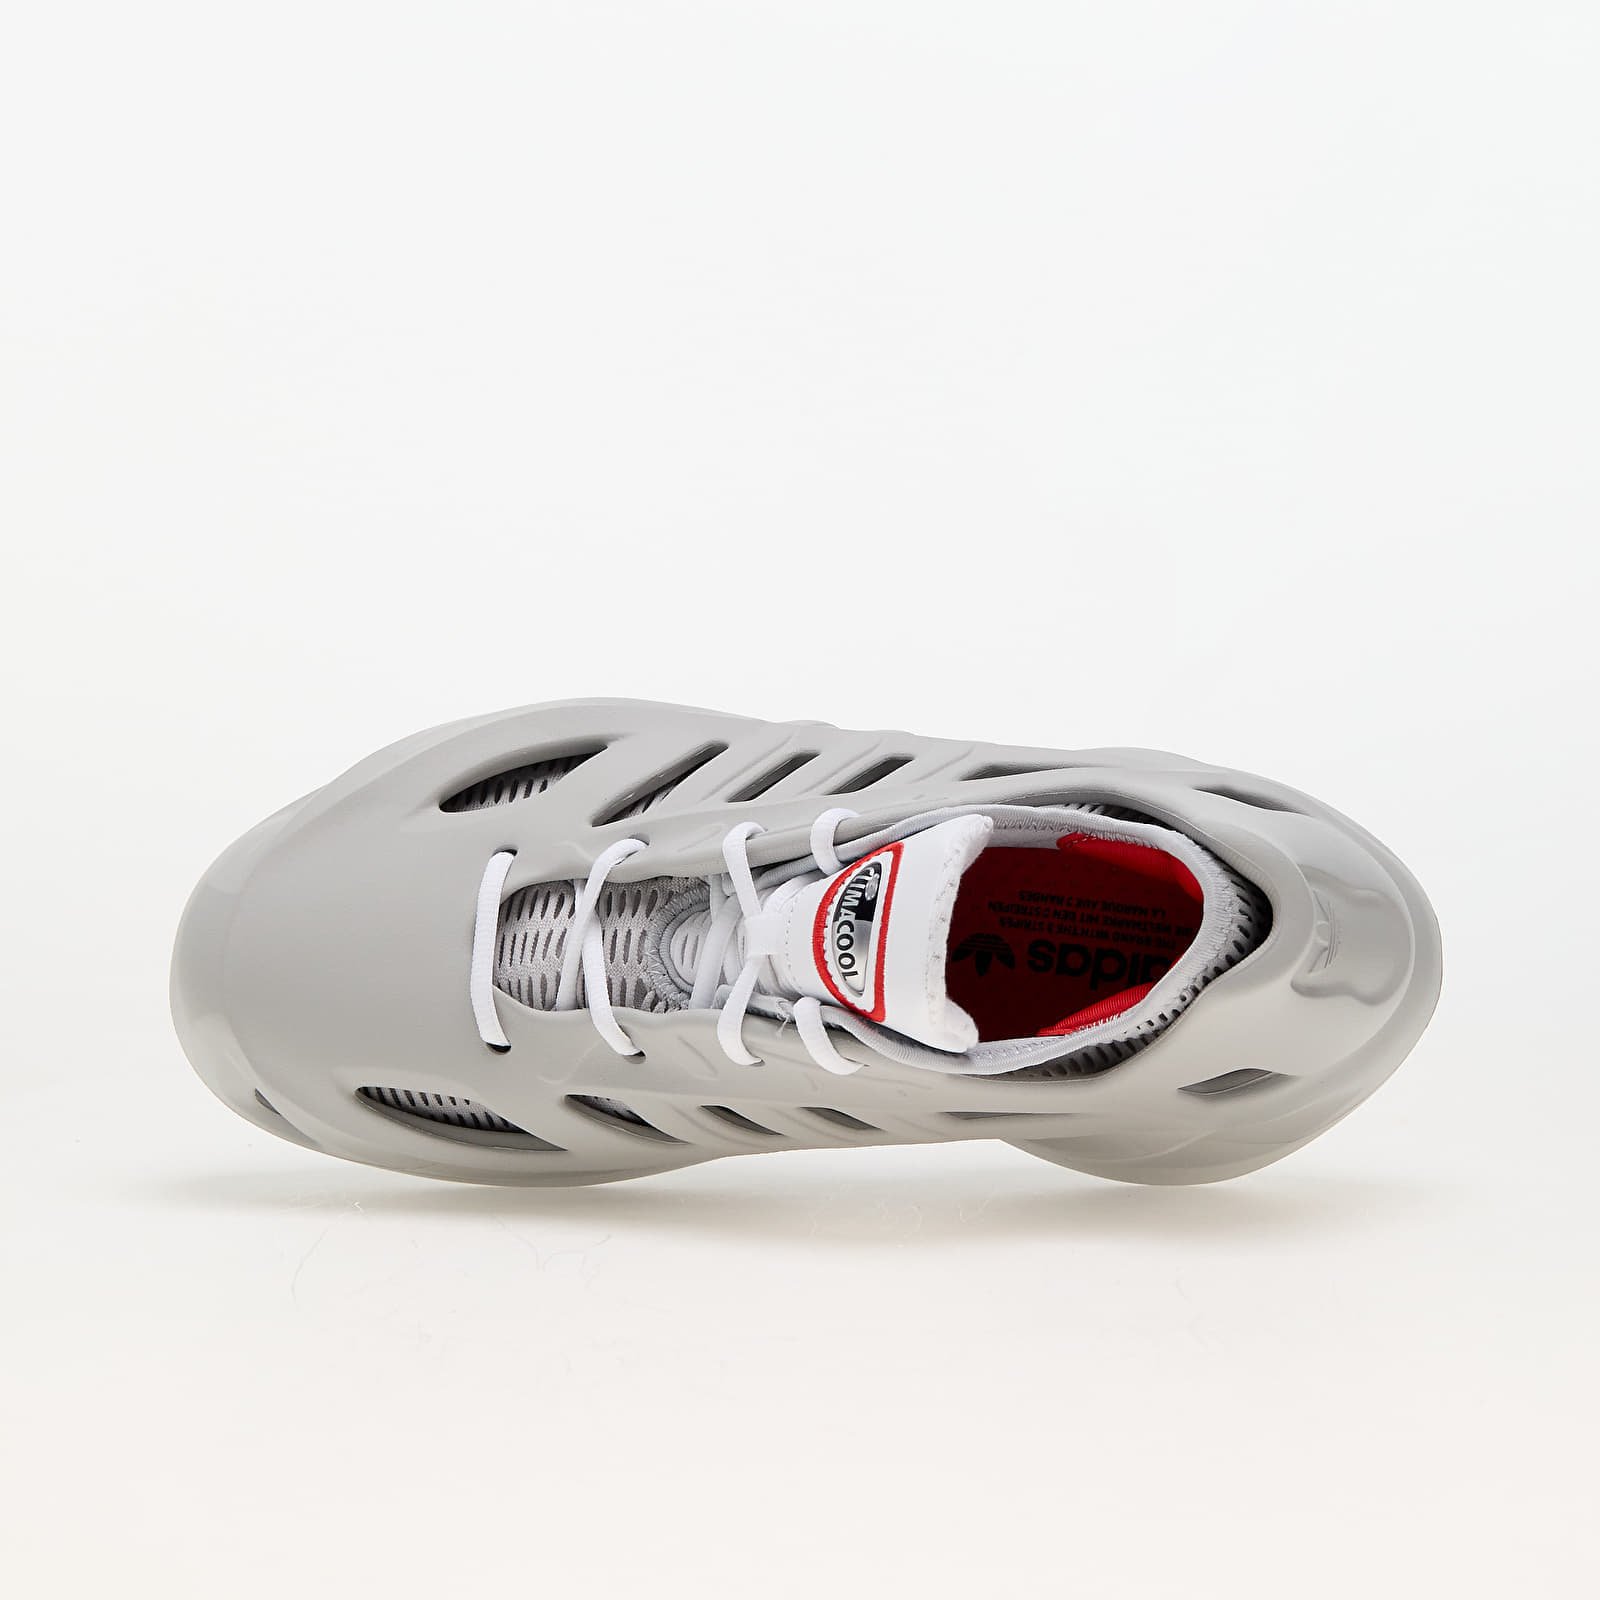 Adifom Climacool Grey Two/ Silver Metallic/ Red